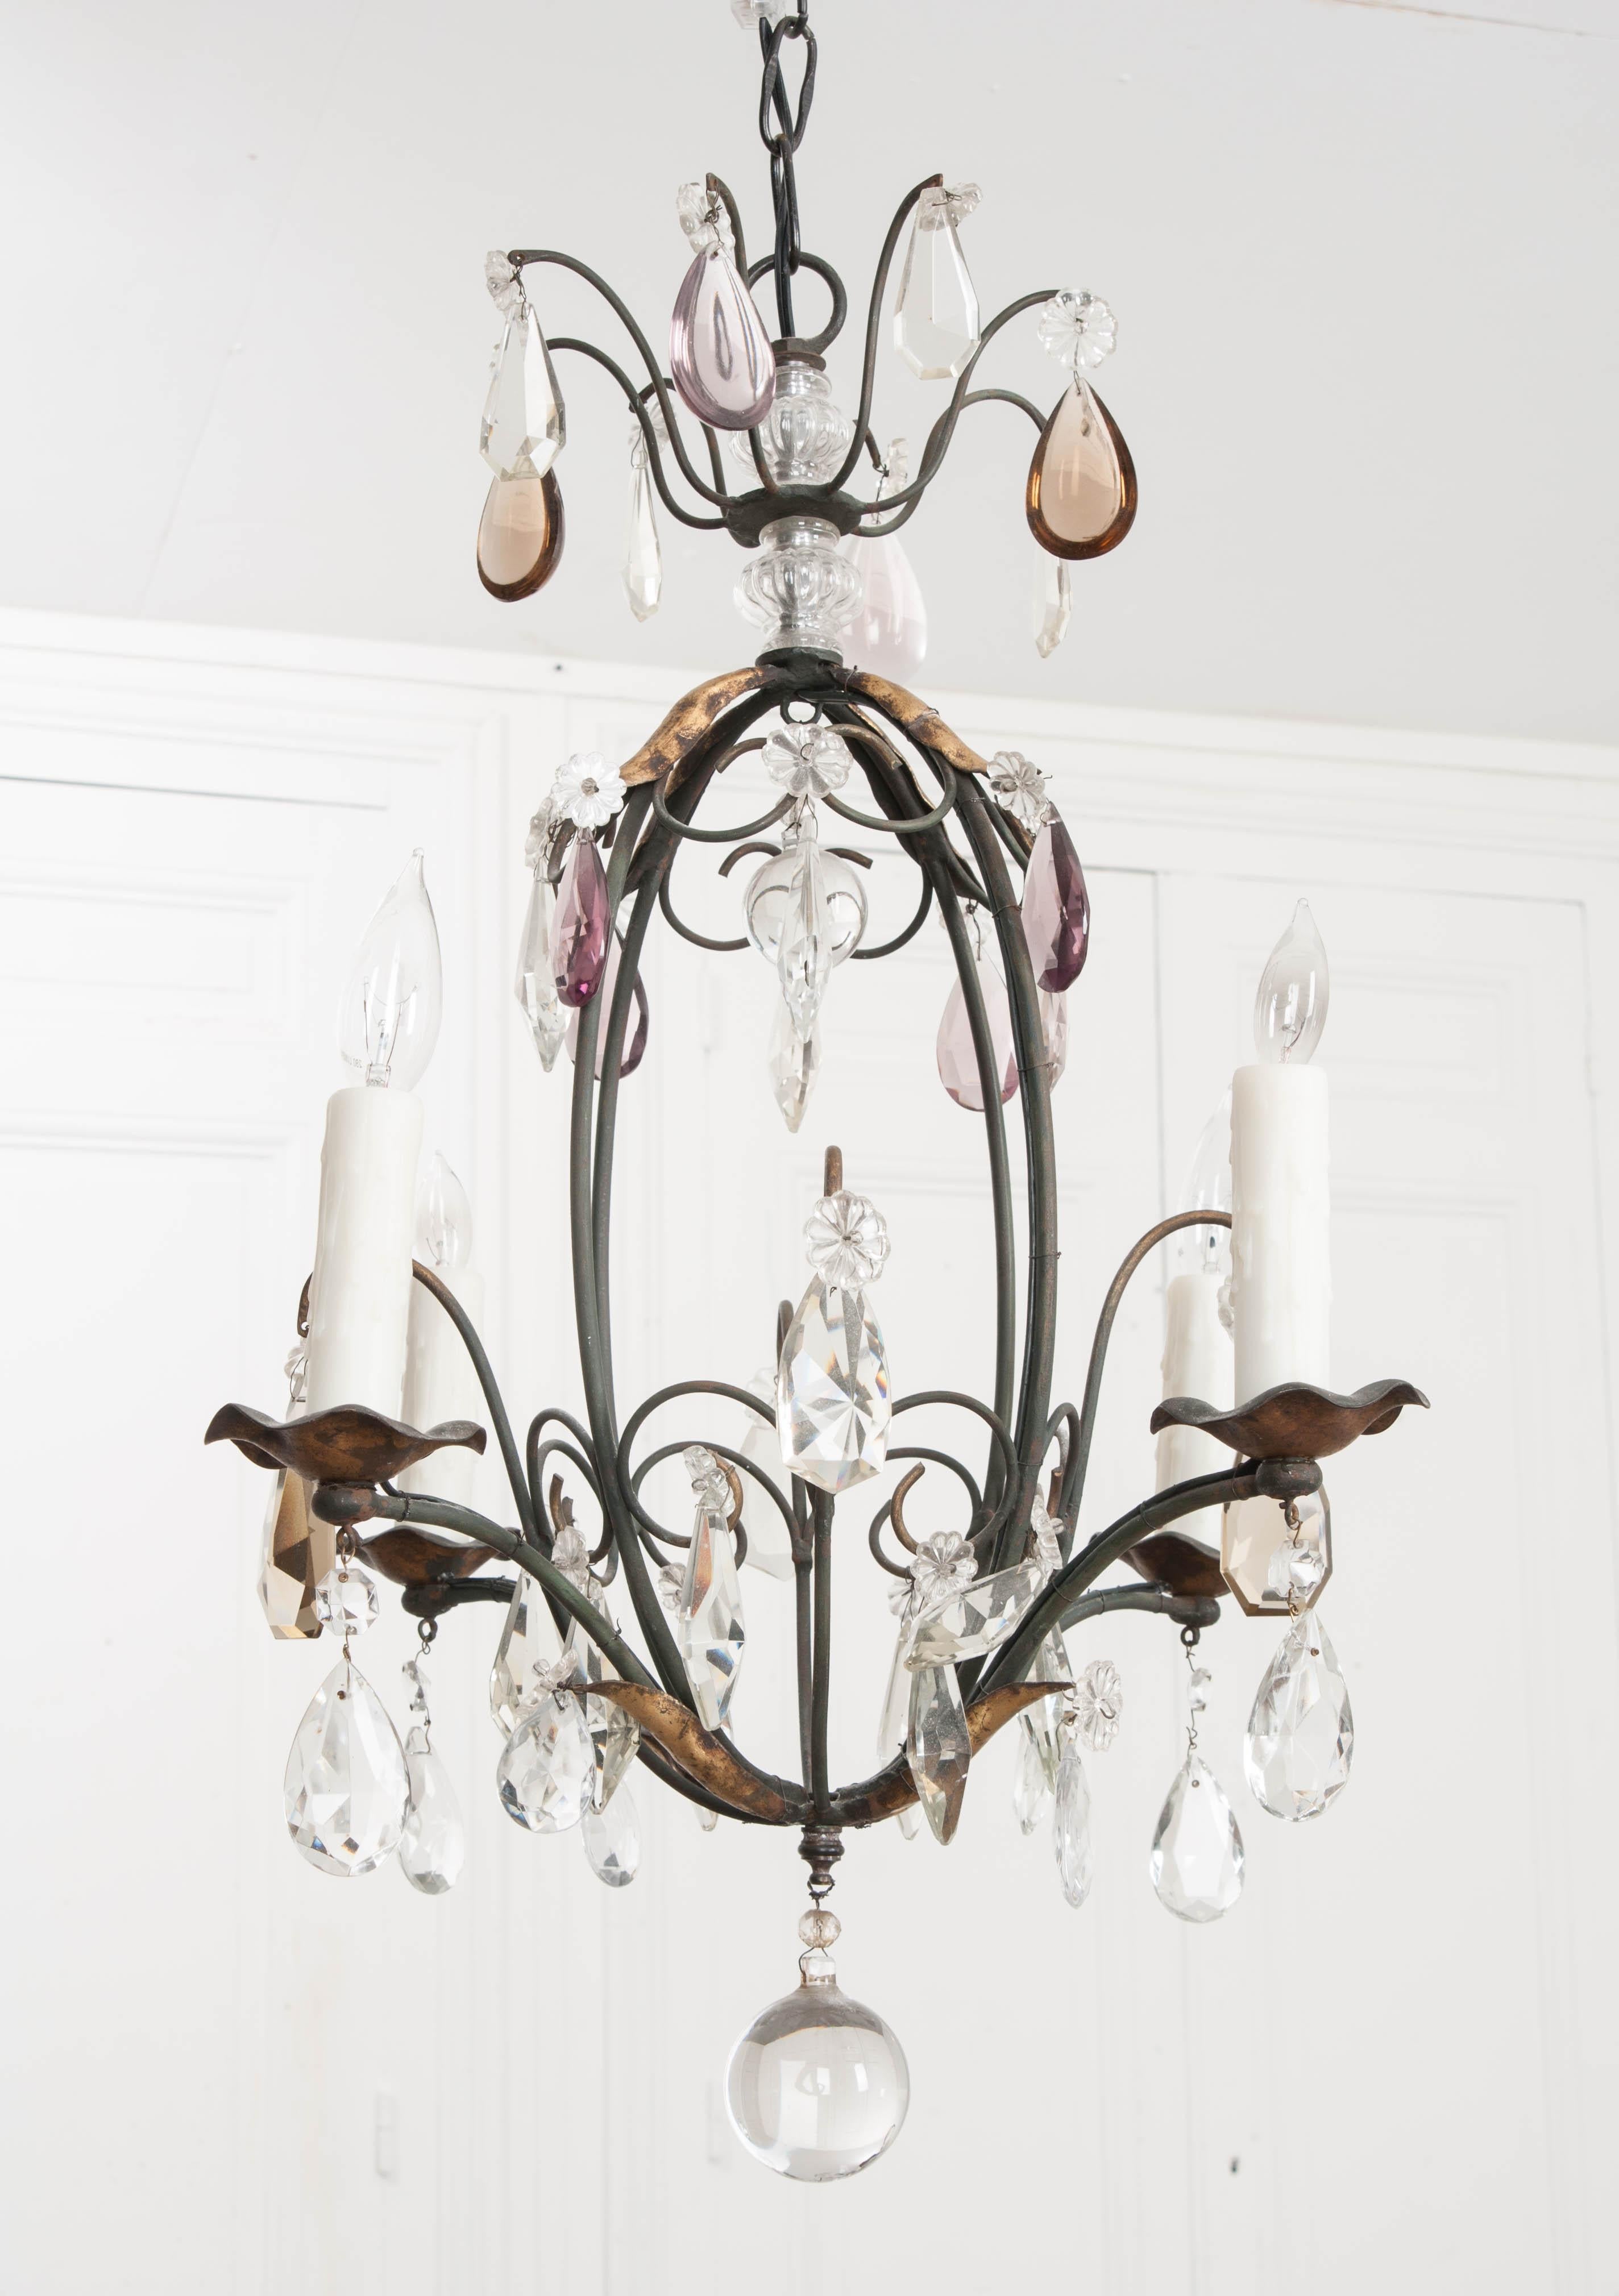 This diminutive wrought iron birdcage chandelier has clear, amethyst, and topaz cut-crystal drops of marquis and teardrop form. The wrought iron standard has applied gilt leaves and a round crystal ball drop. The whole is suspended from a chain